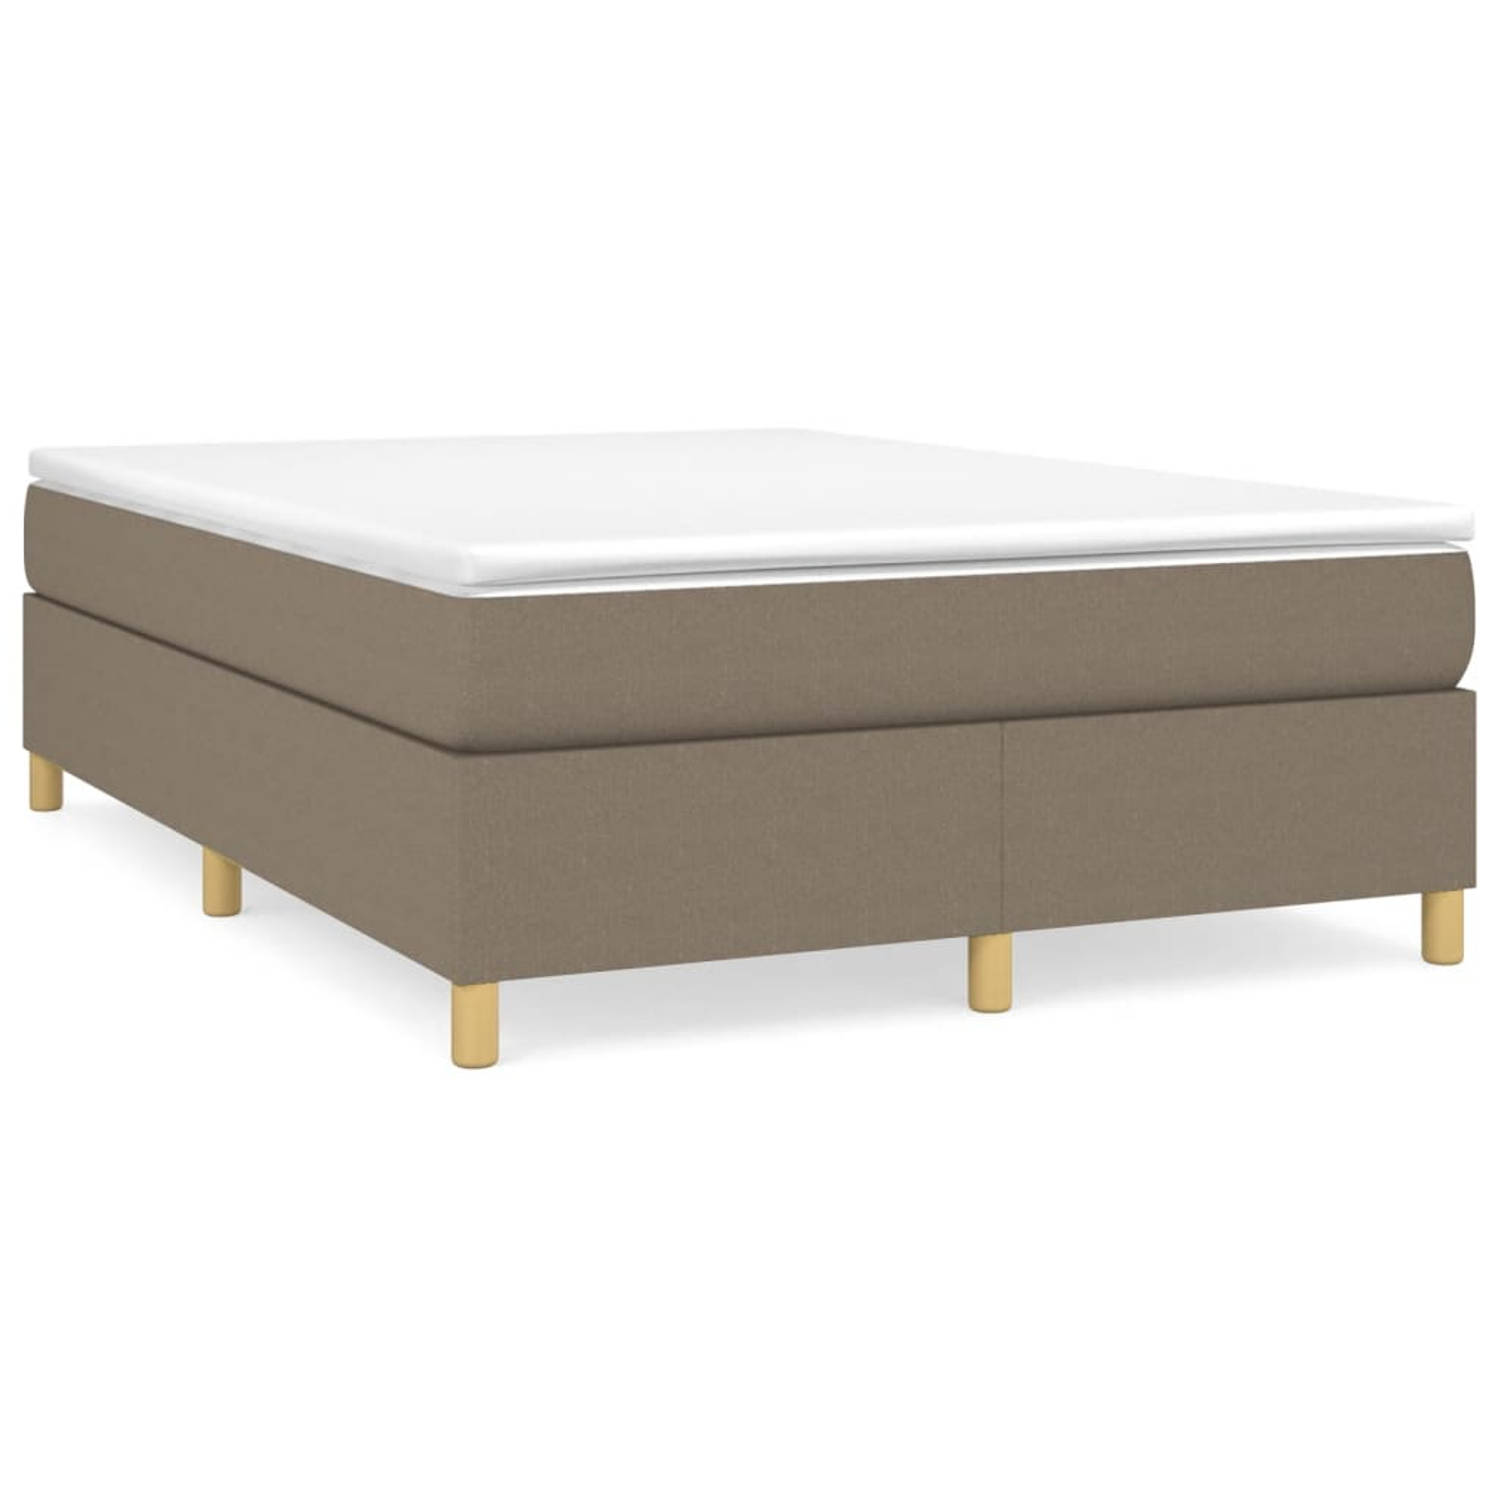 The Living Store Boxspringframe stof taupe 140x190 cm - Boxspringframe - Boxspringframes - Bed - Ledikant - Slaapmeubel - Bedframe - Bedbodem - Tweepersoonsbed - Boxspring - Bedden